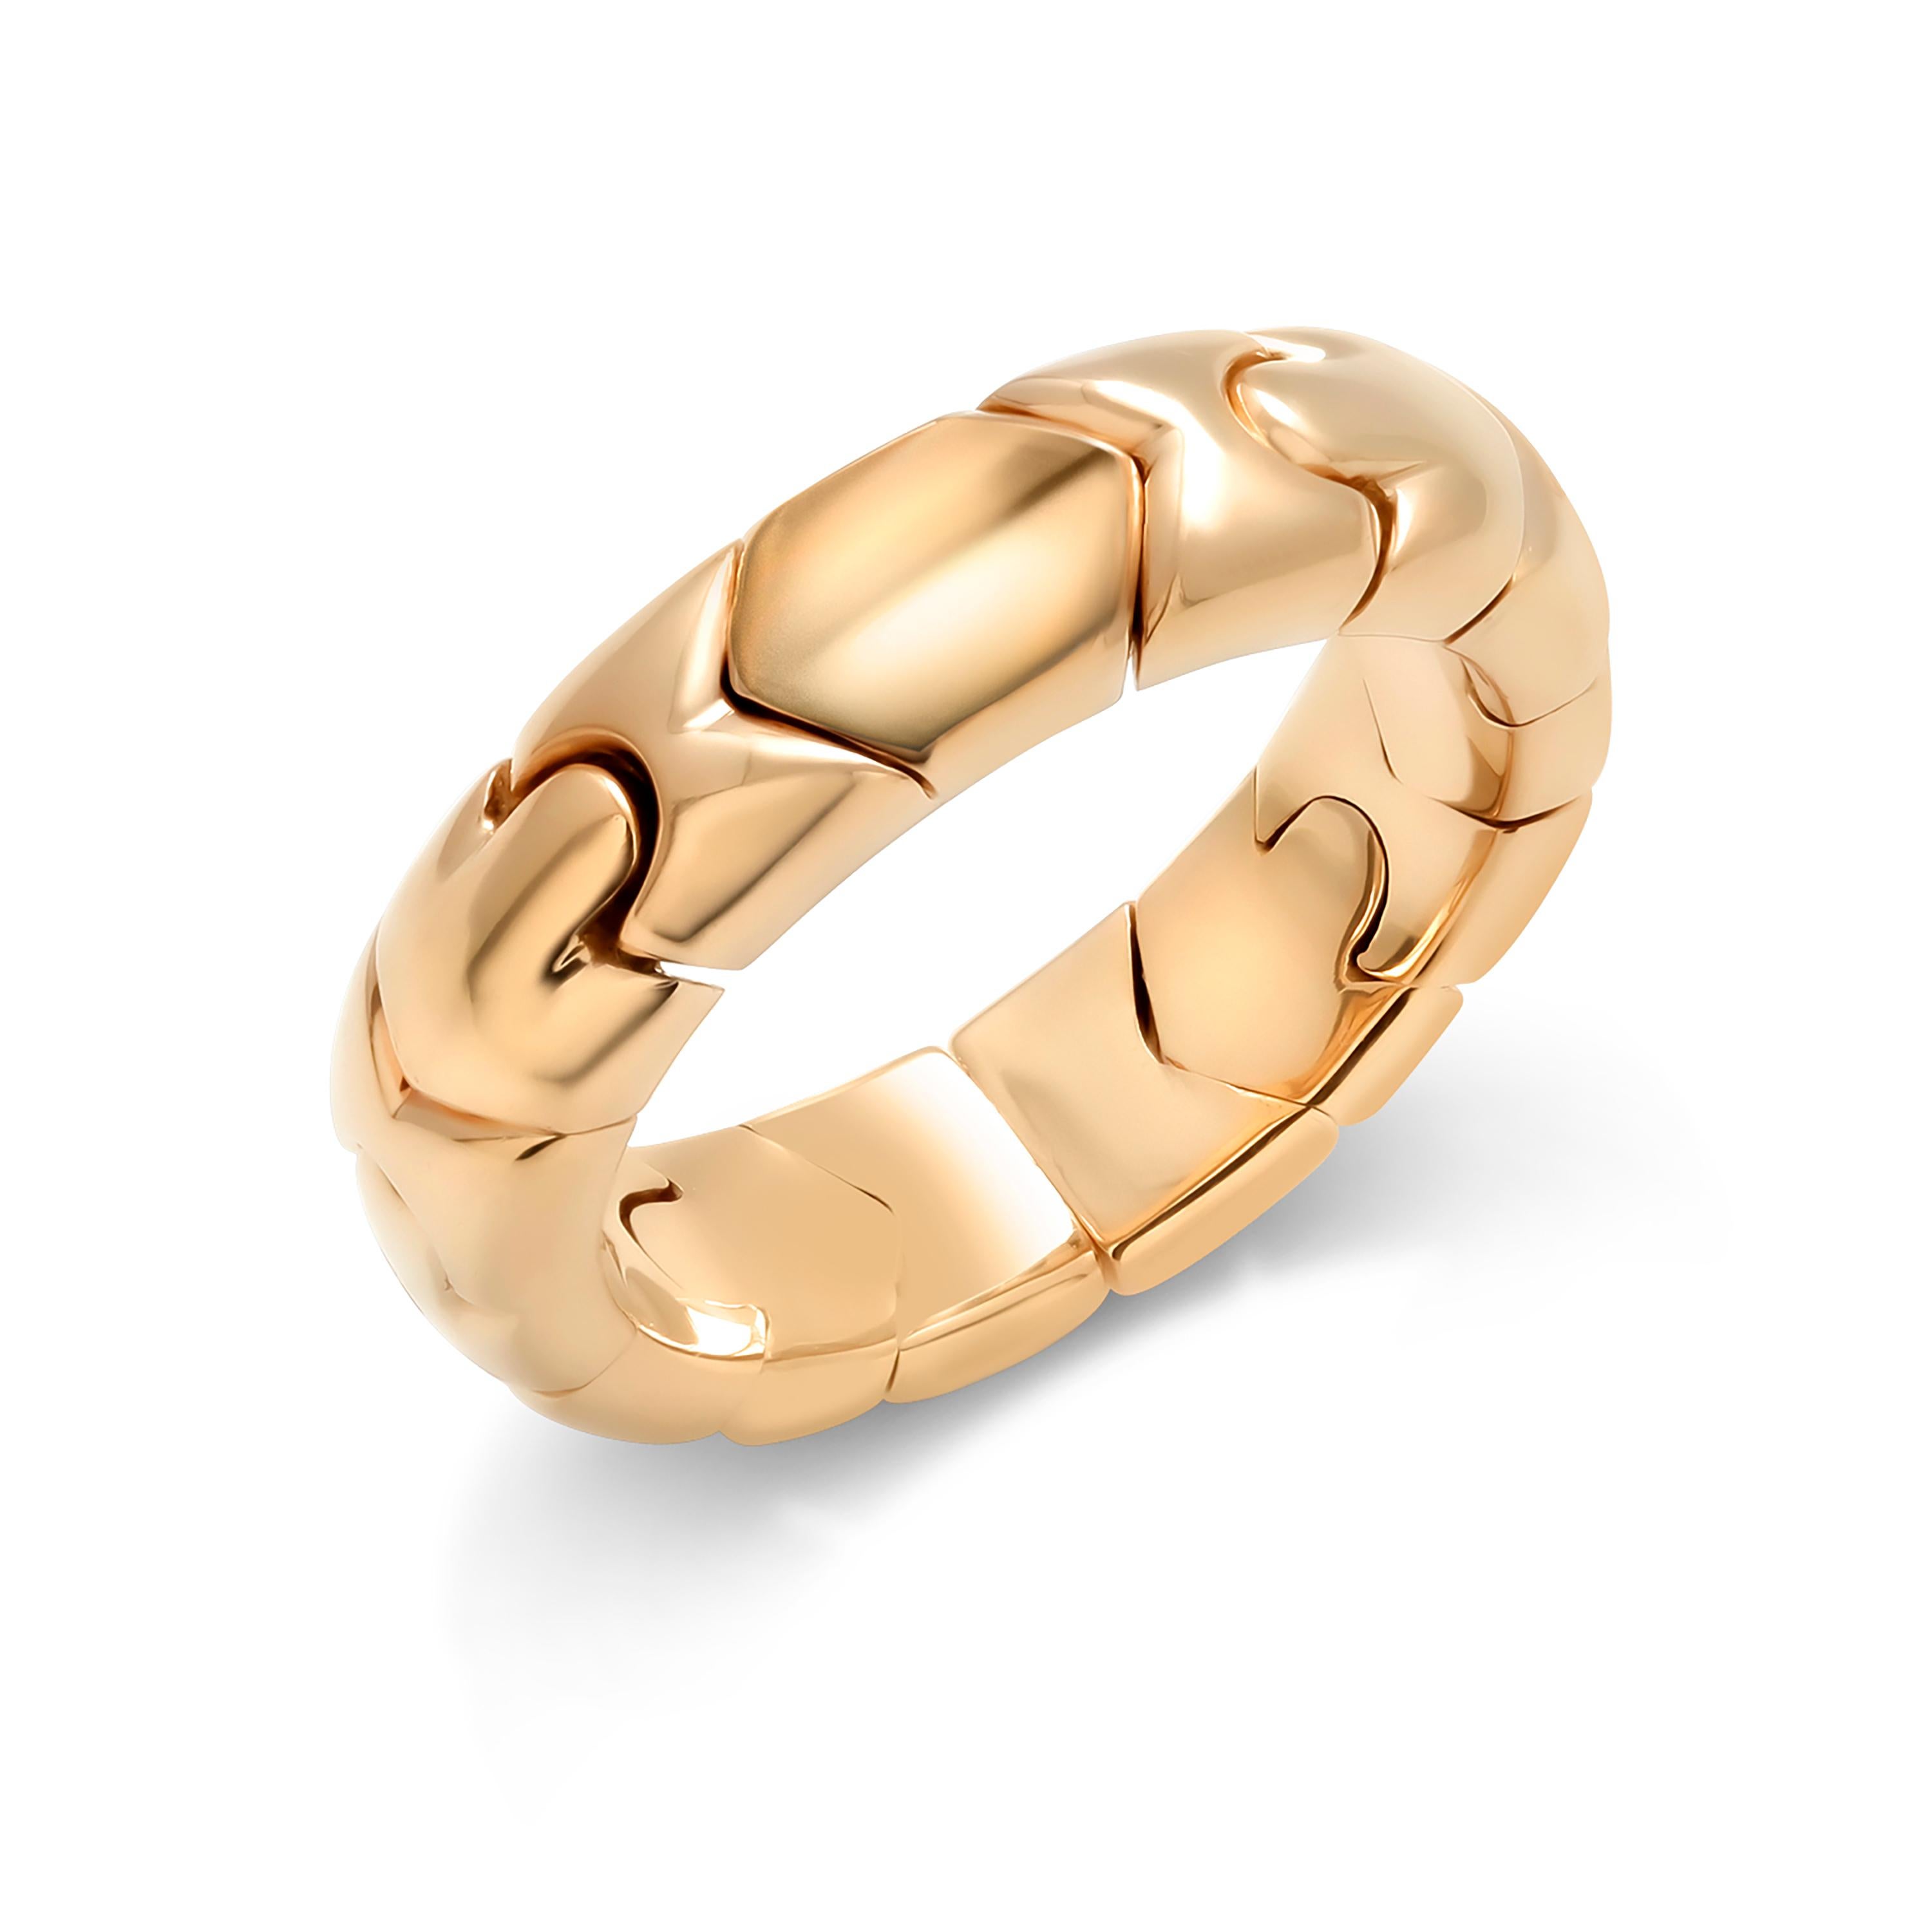 Contemporary Bvlgari Passo Doppio Collection 18 Karat Gold Band Ring Finger Size 9 For Sale